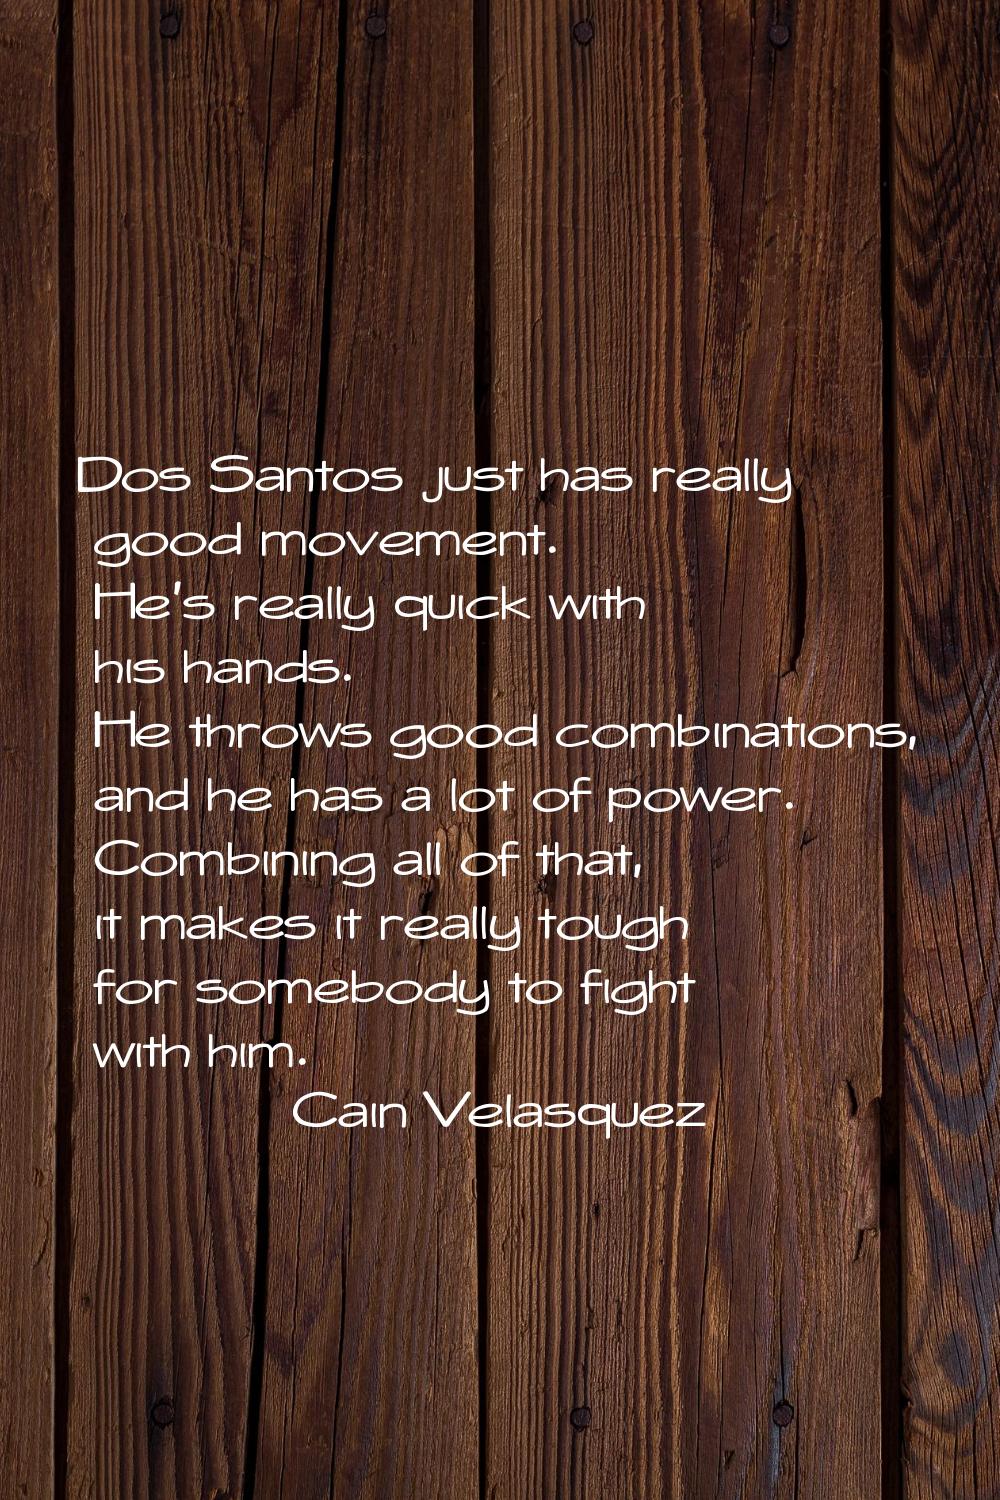 Dos Santos just has really good movement. He's really quick with his hands. He throws good combinat